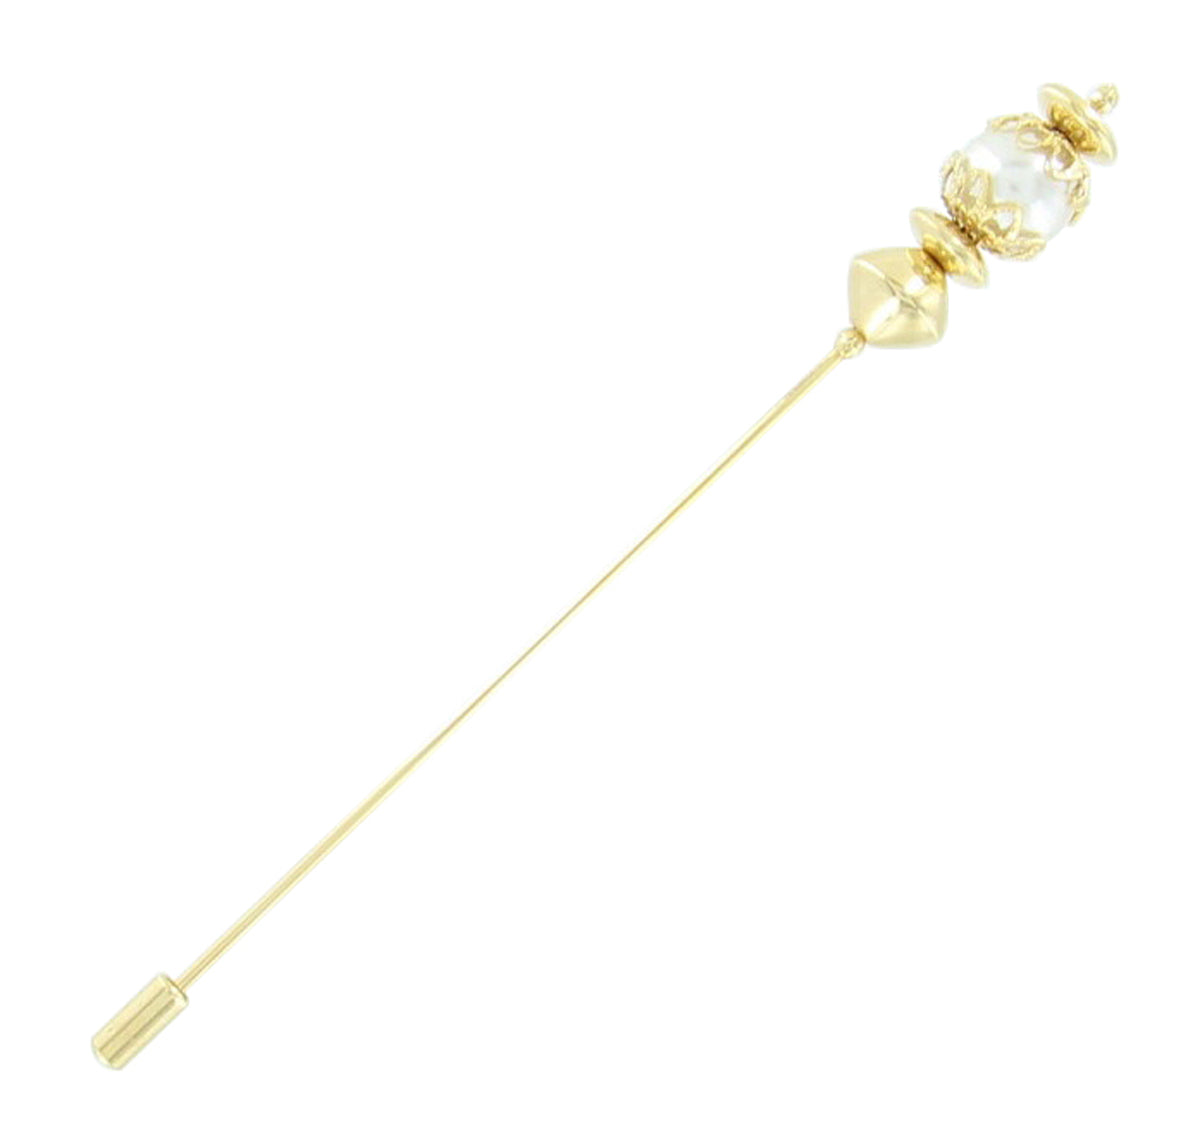 Faux Pearl Bead Gold Tone Hat Pin Stick Suit Brooch Corsage Wedding 4 1/2"